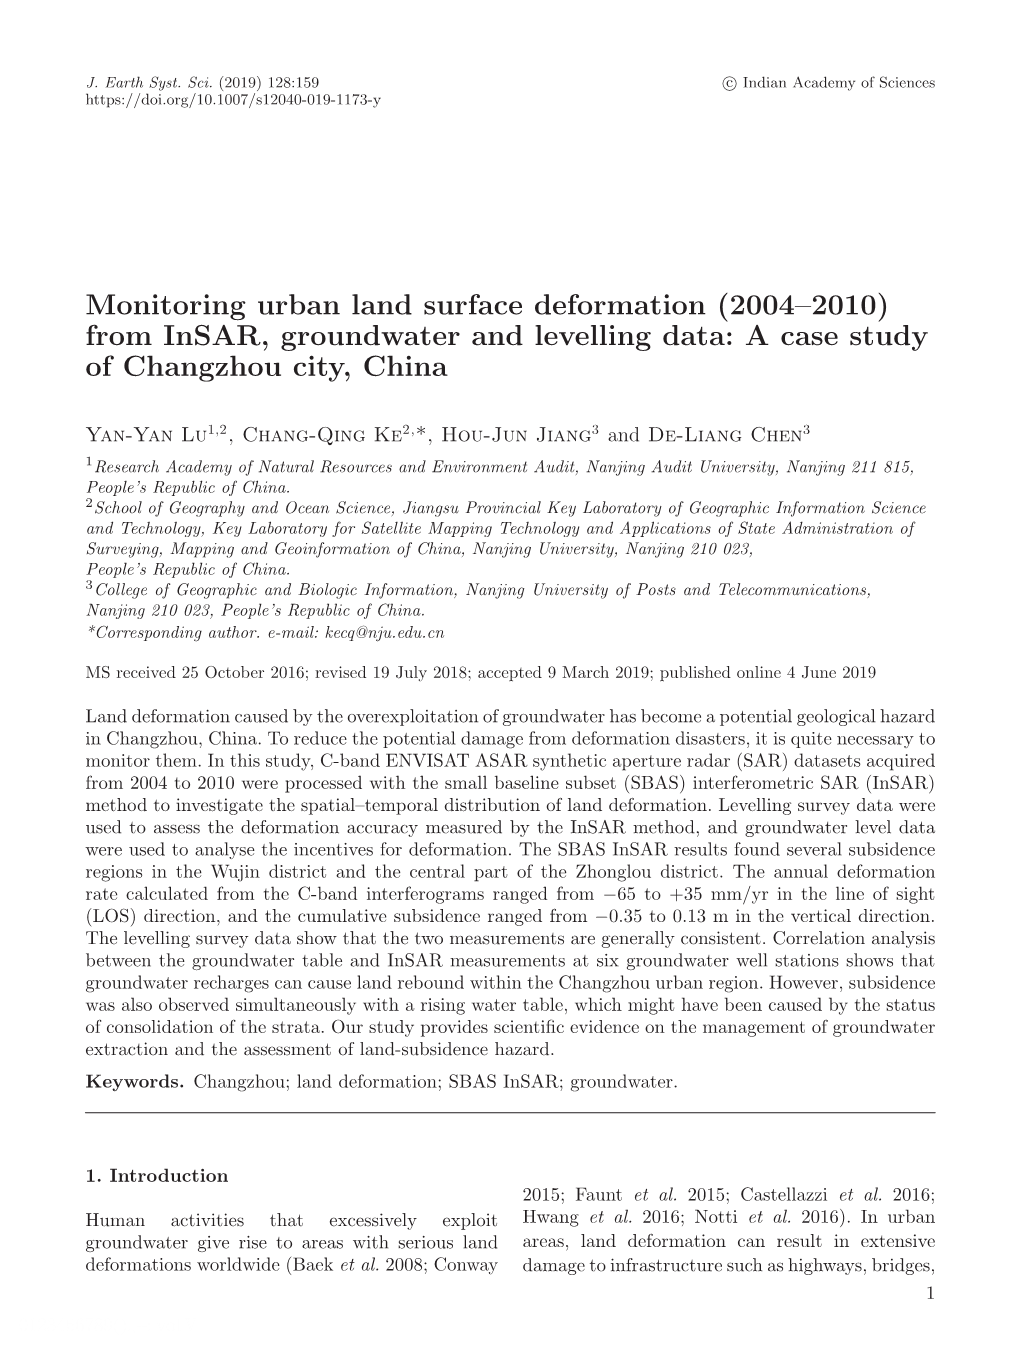 From Insar, Groundwater and Levelling Data: a Case Study of Changzhou City, China